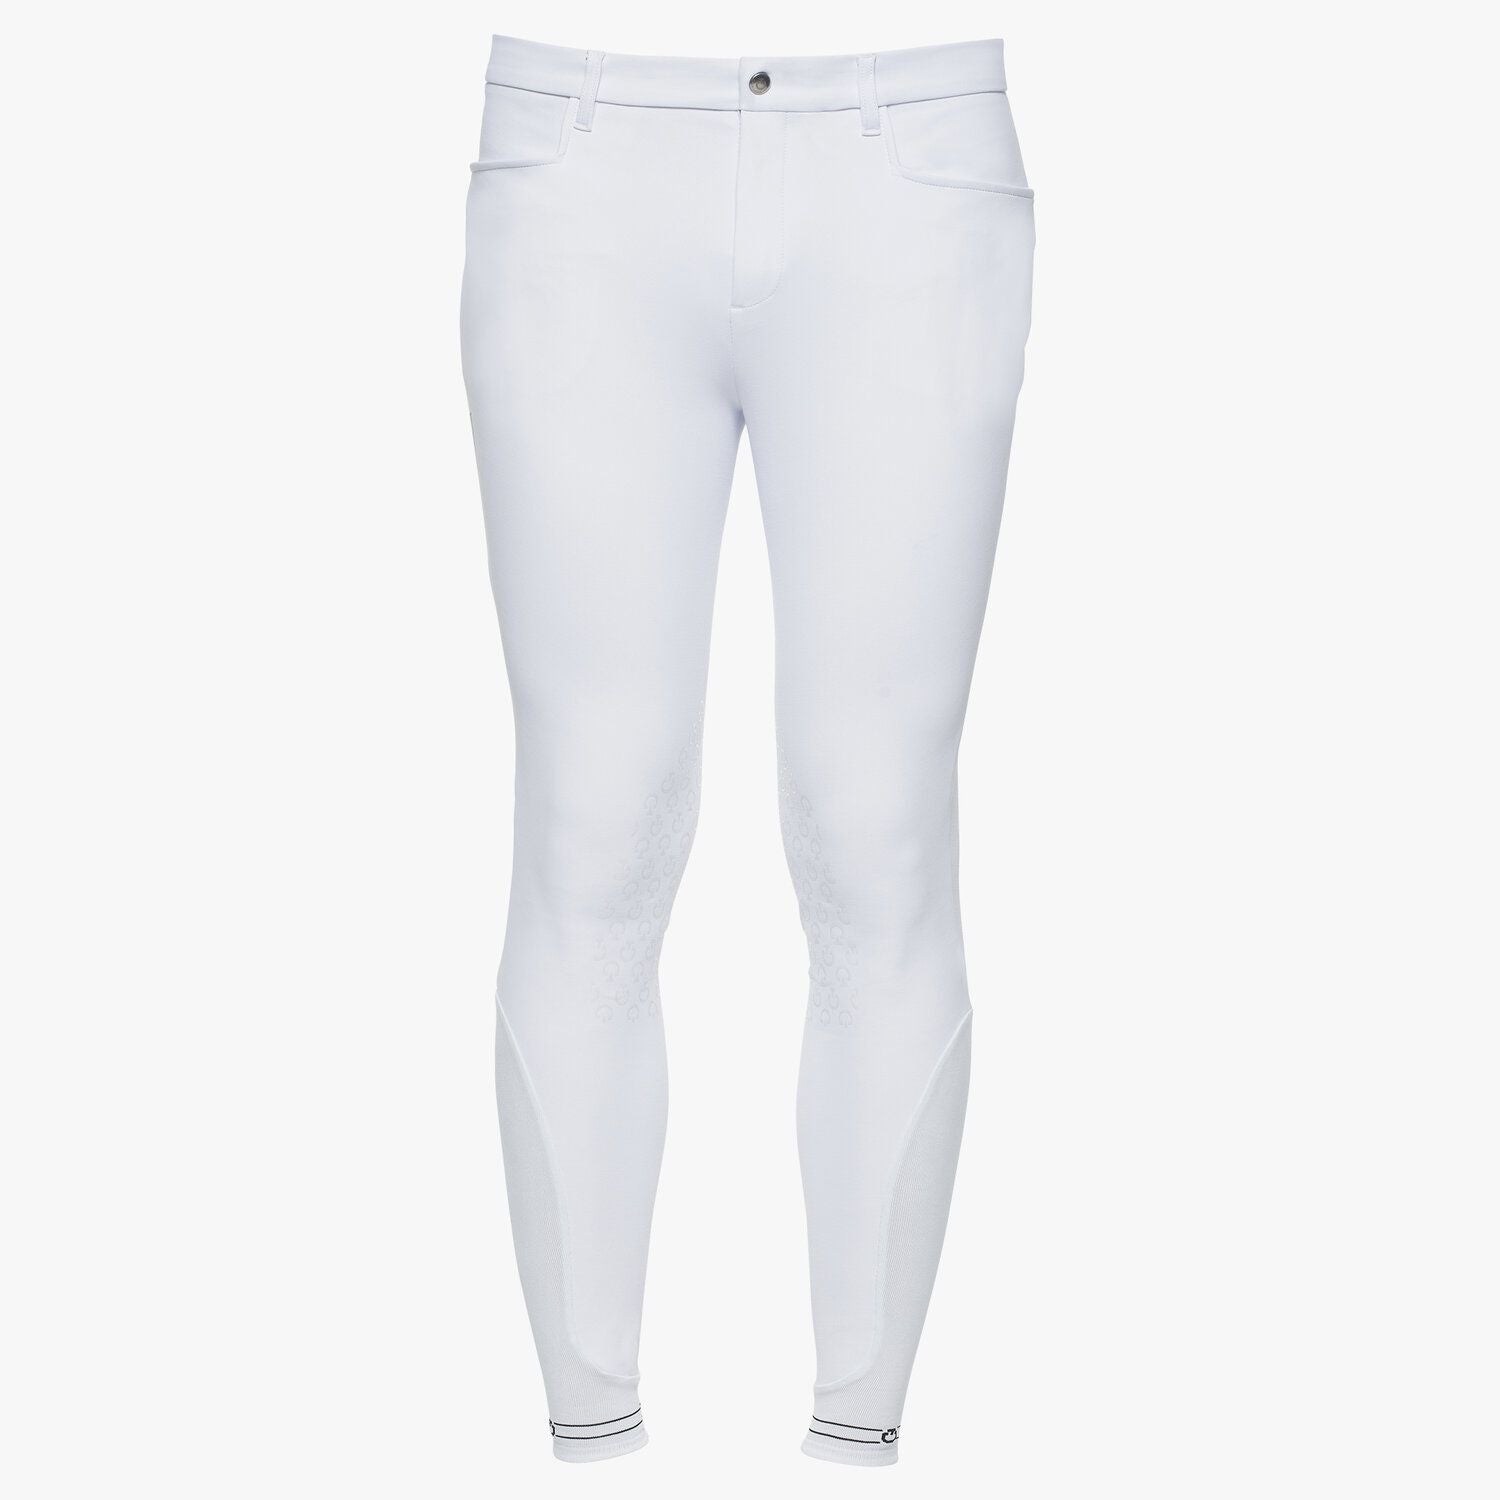 Cavalleria Toscana Men's New Grip System Breeches with Logo Tape White